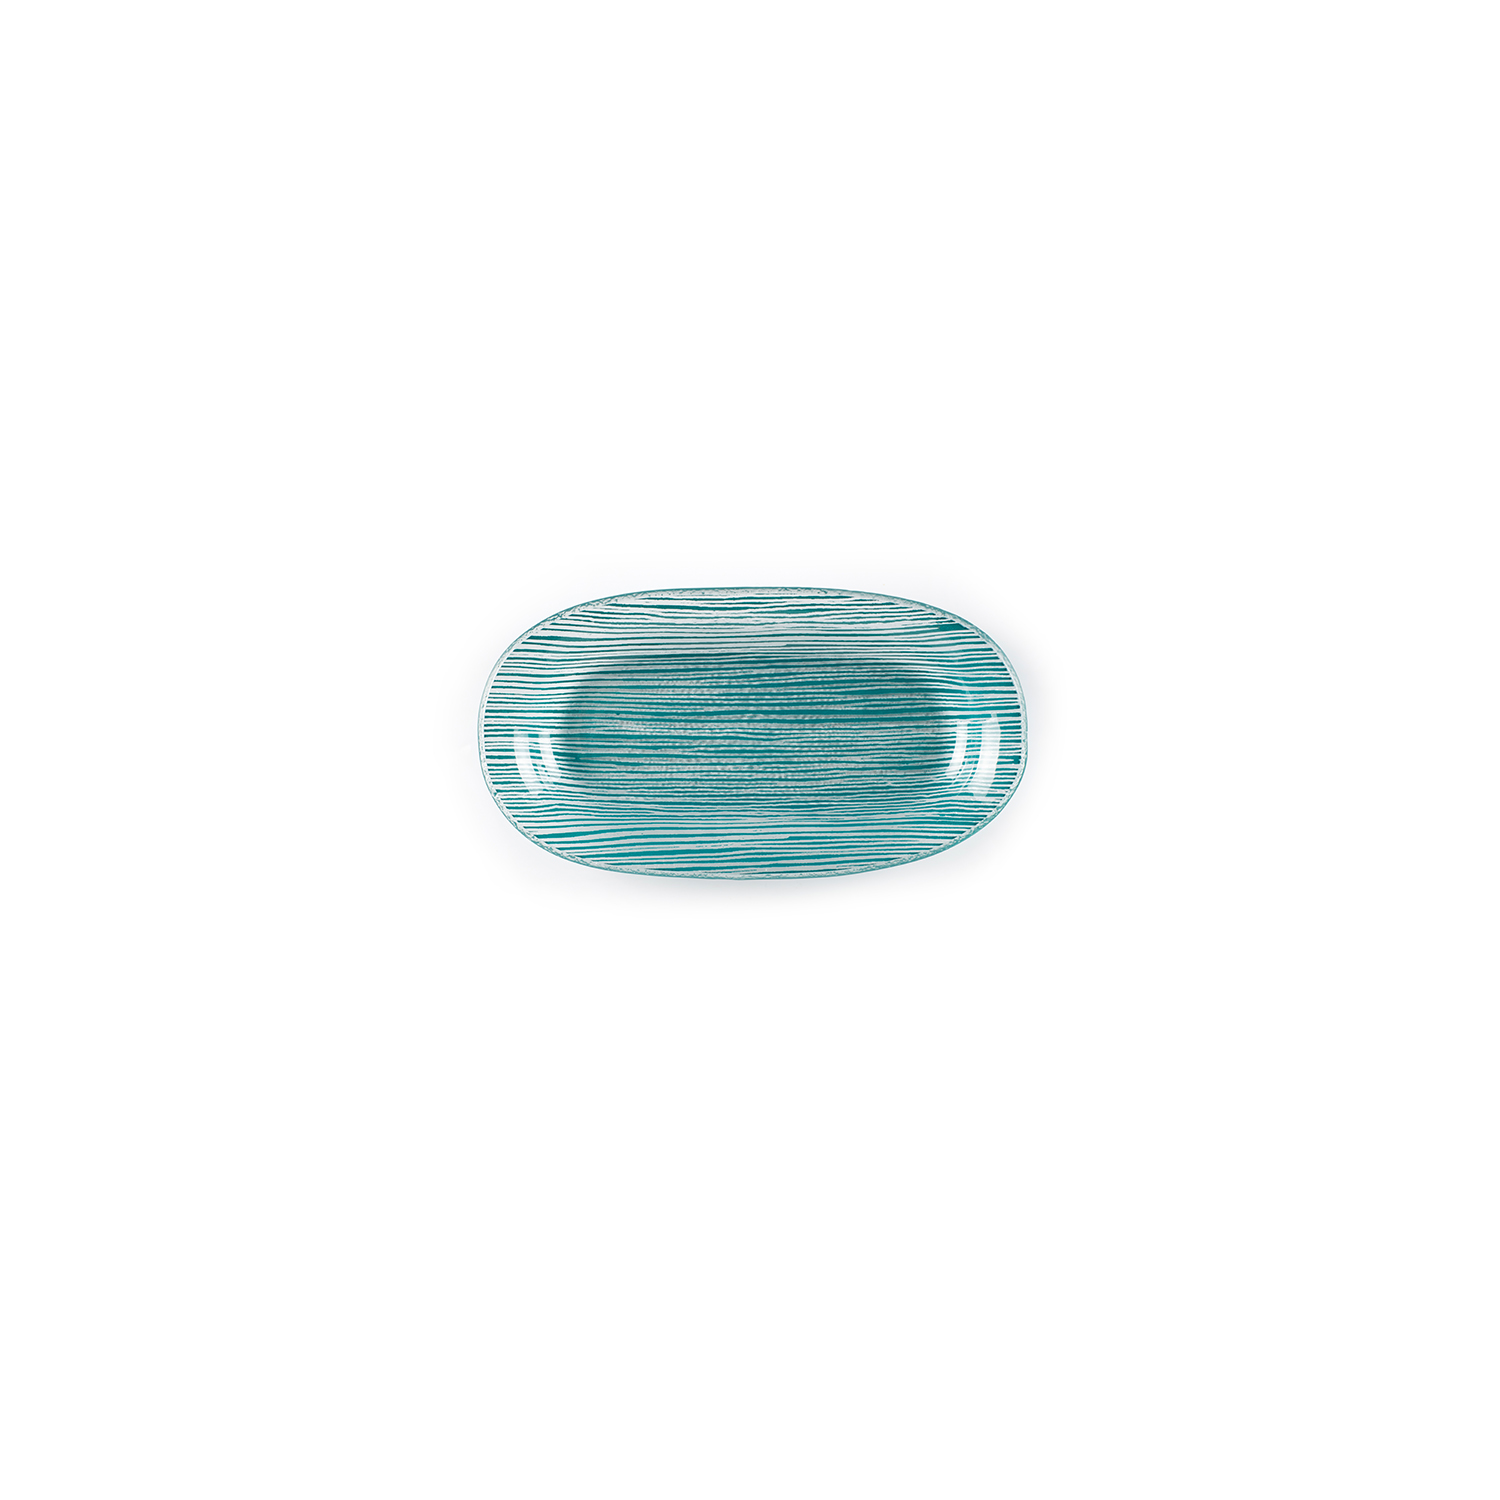 Fusion Glass Platter Turquoise Oval 7.75″ x 4.25″ x 0.5″  CasePack:12